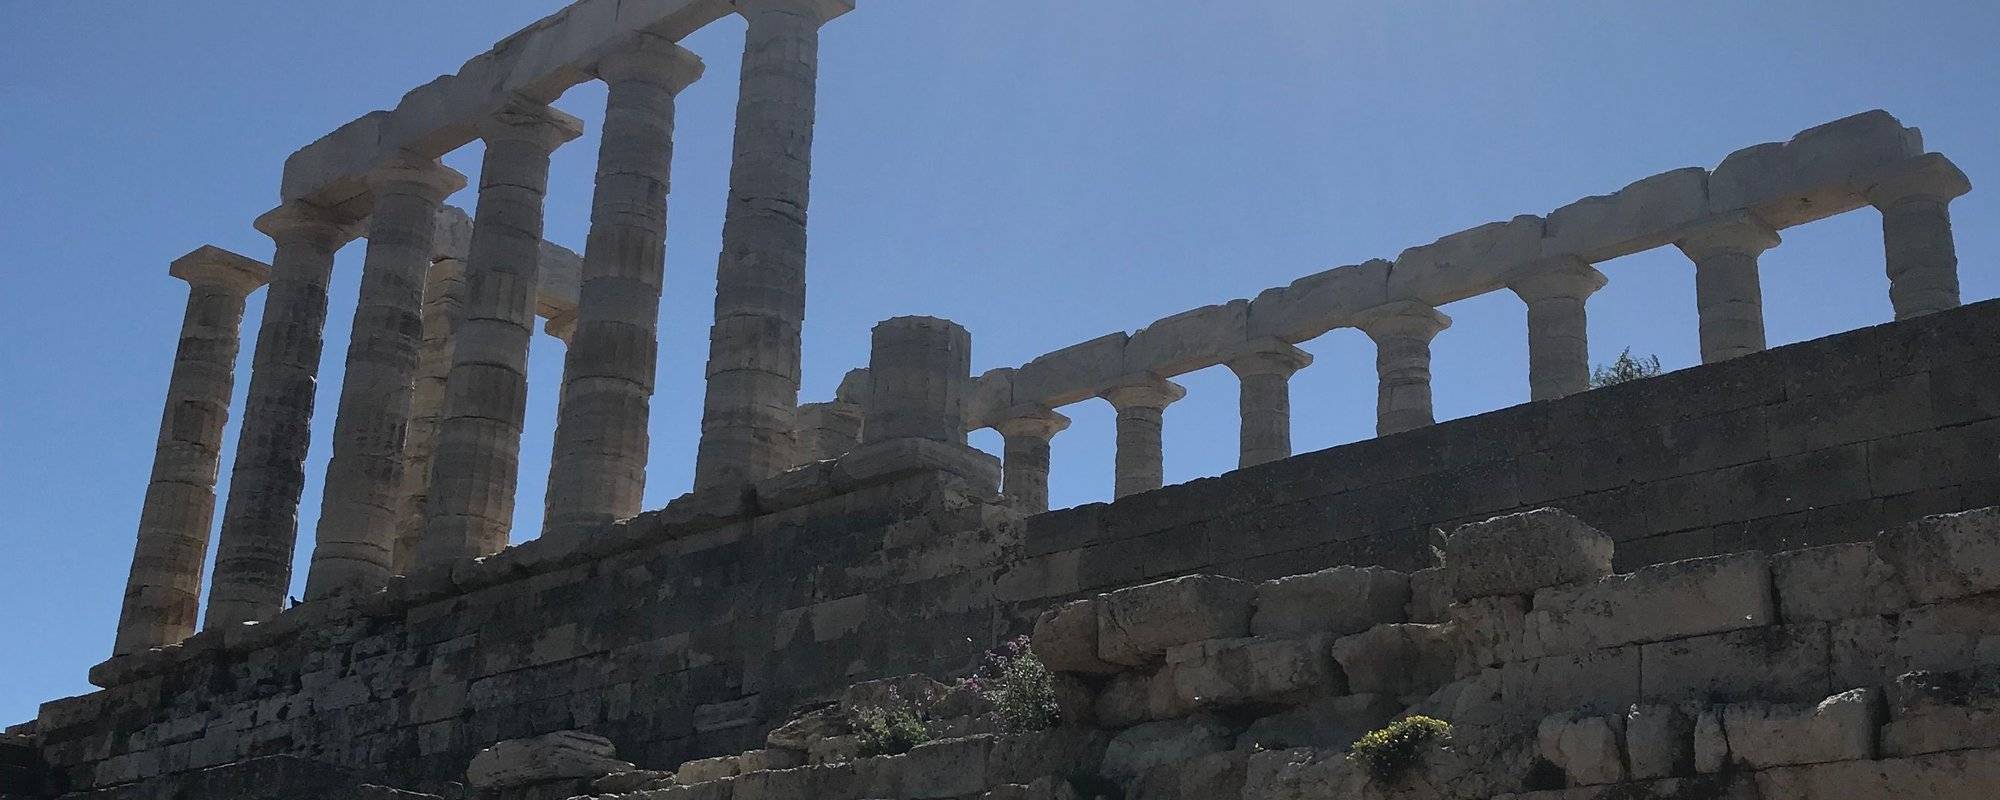 🇬🇷 Cape Sojourn, Greece: The Temple of Poseidon